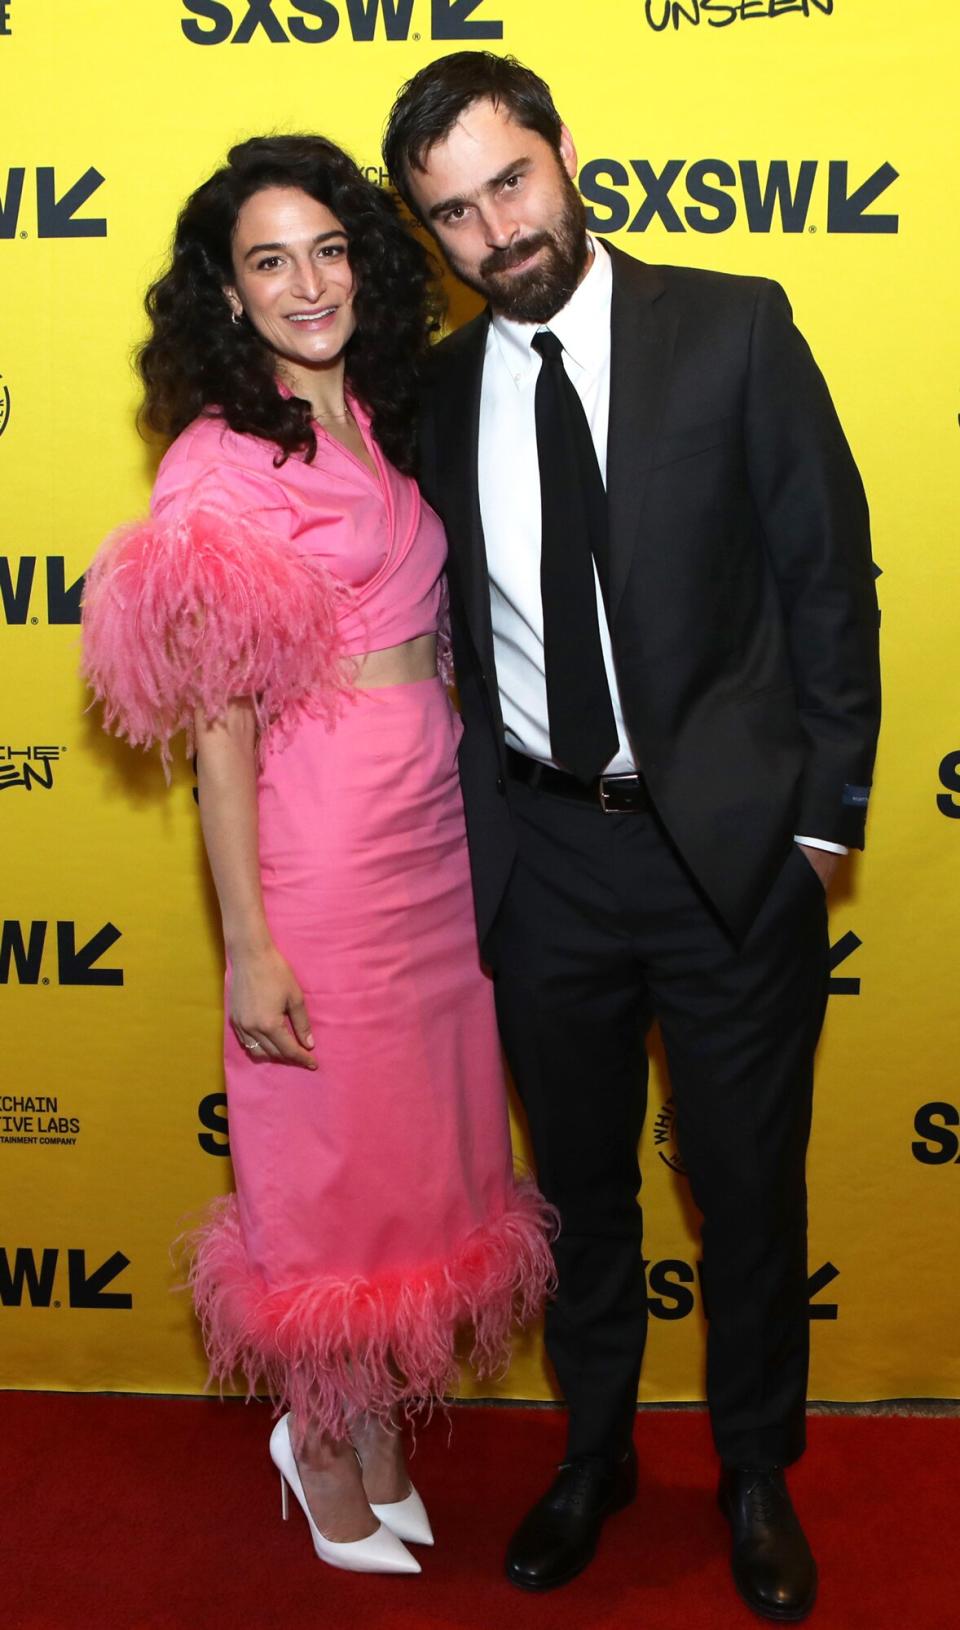 Jenny Slate and Ben Shattuck attend "Marcel The Shell With Shoes On" Premiere during the 2022 SXSW Conference and Festivals at Stateside Theater on March 12, 2022 in Austin, Texas